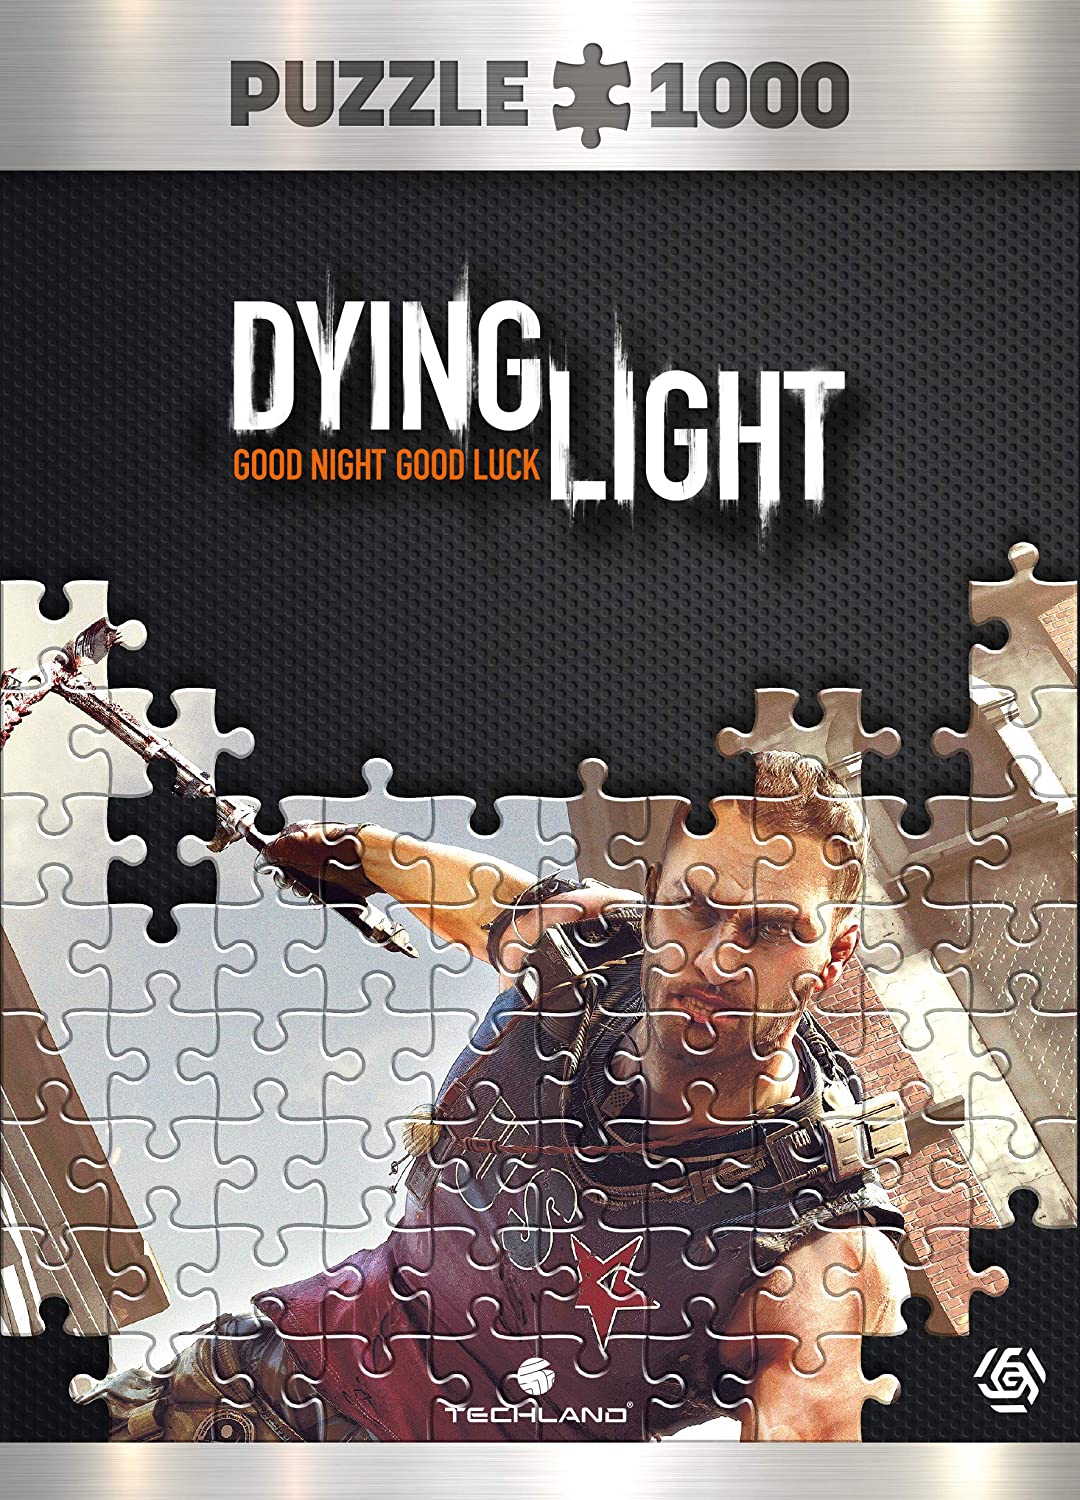 Good Loot Dying Light Kyle Crane - 1000 Pieces Jigsaw Puzzle 68cm x 48cm | includes Poster and Bag | Game Artwork for Adults and Teenagers